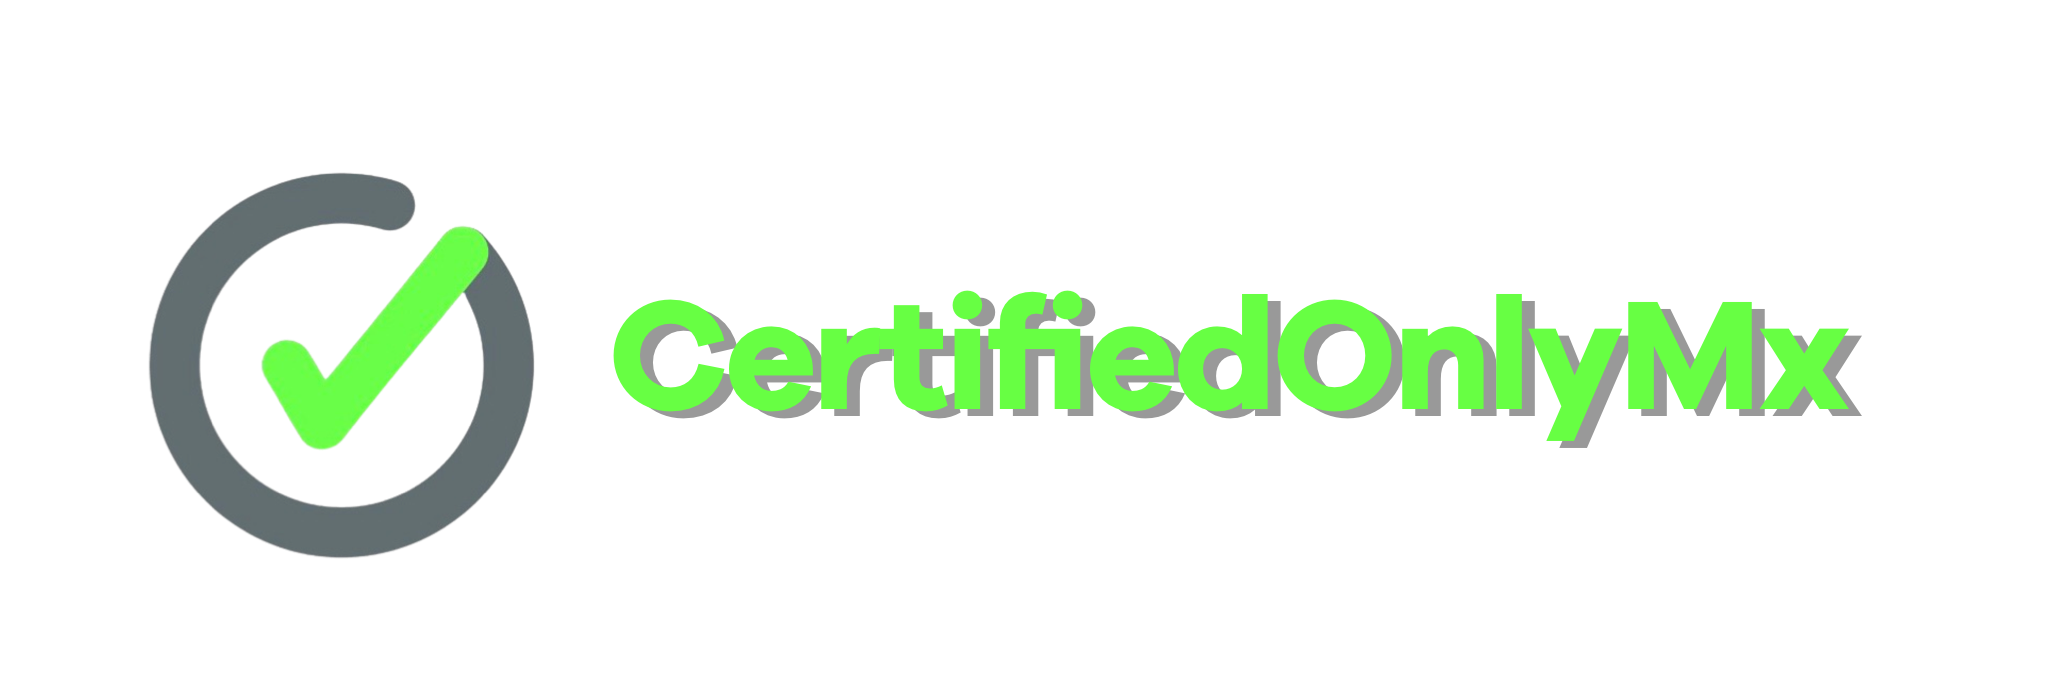 Certified Only